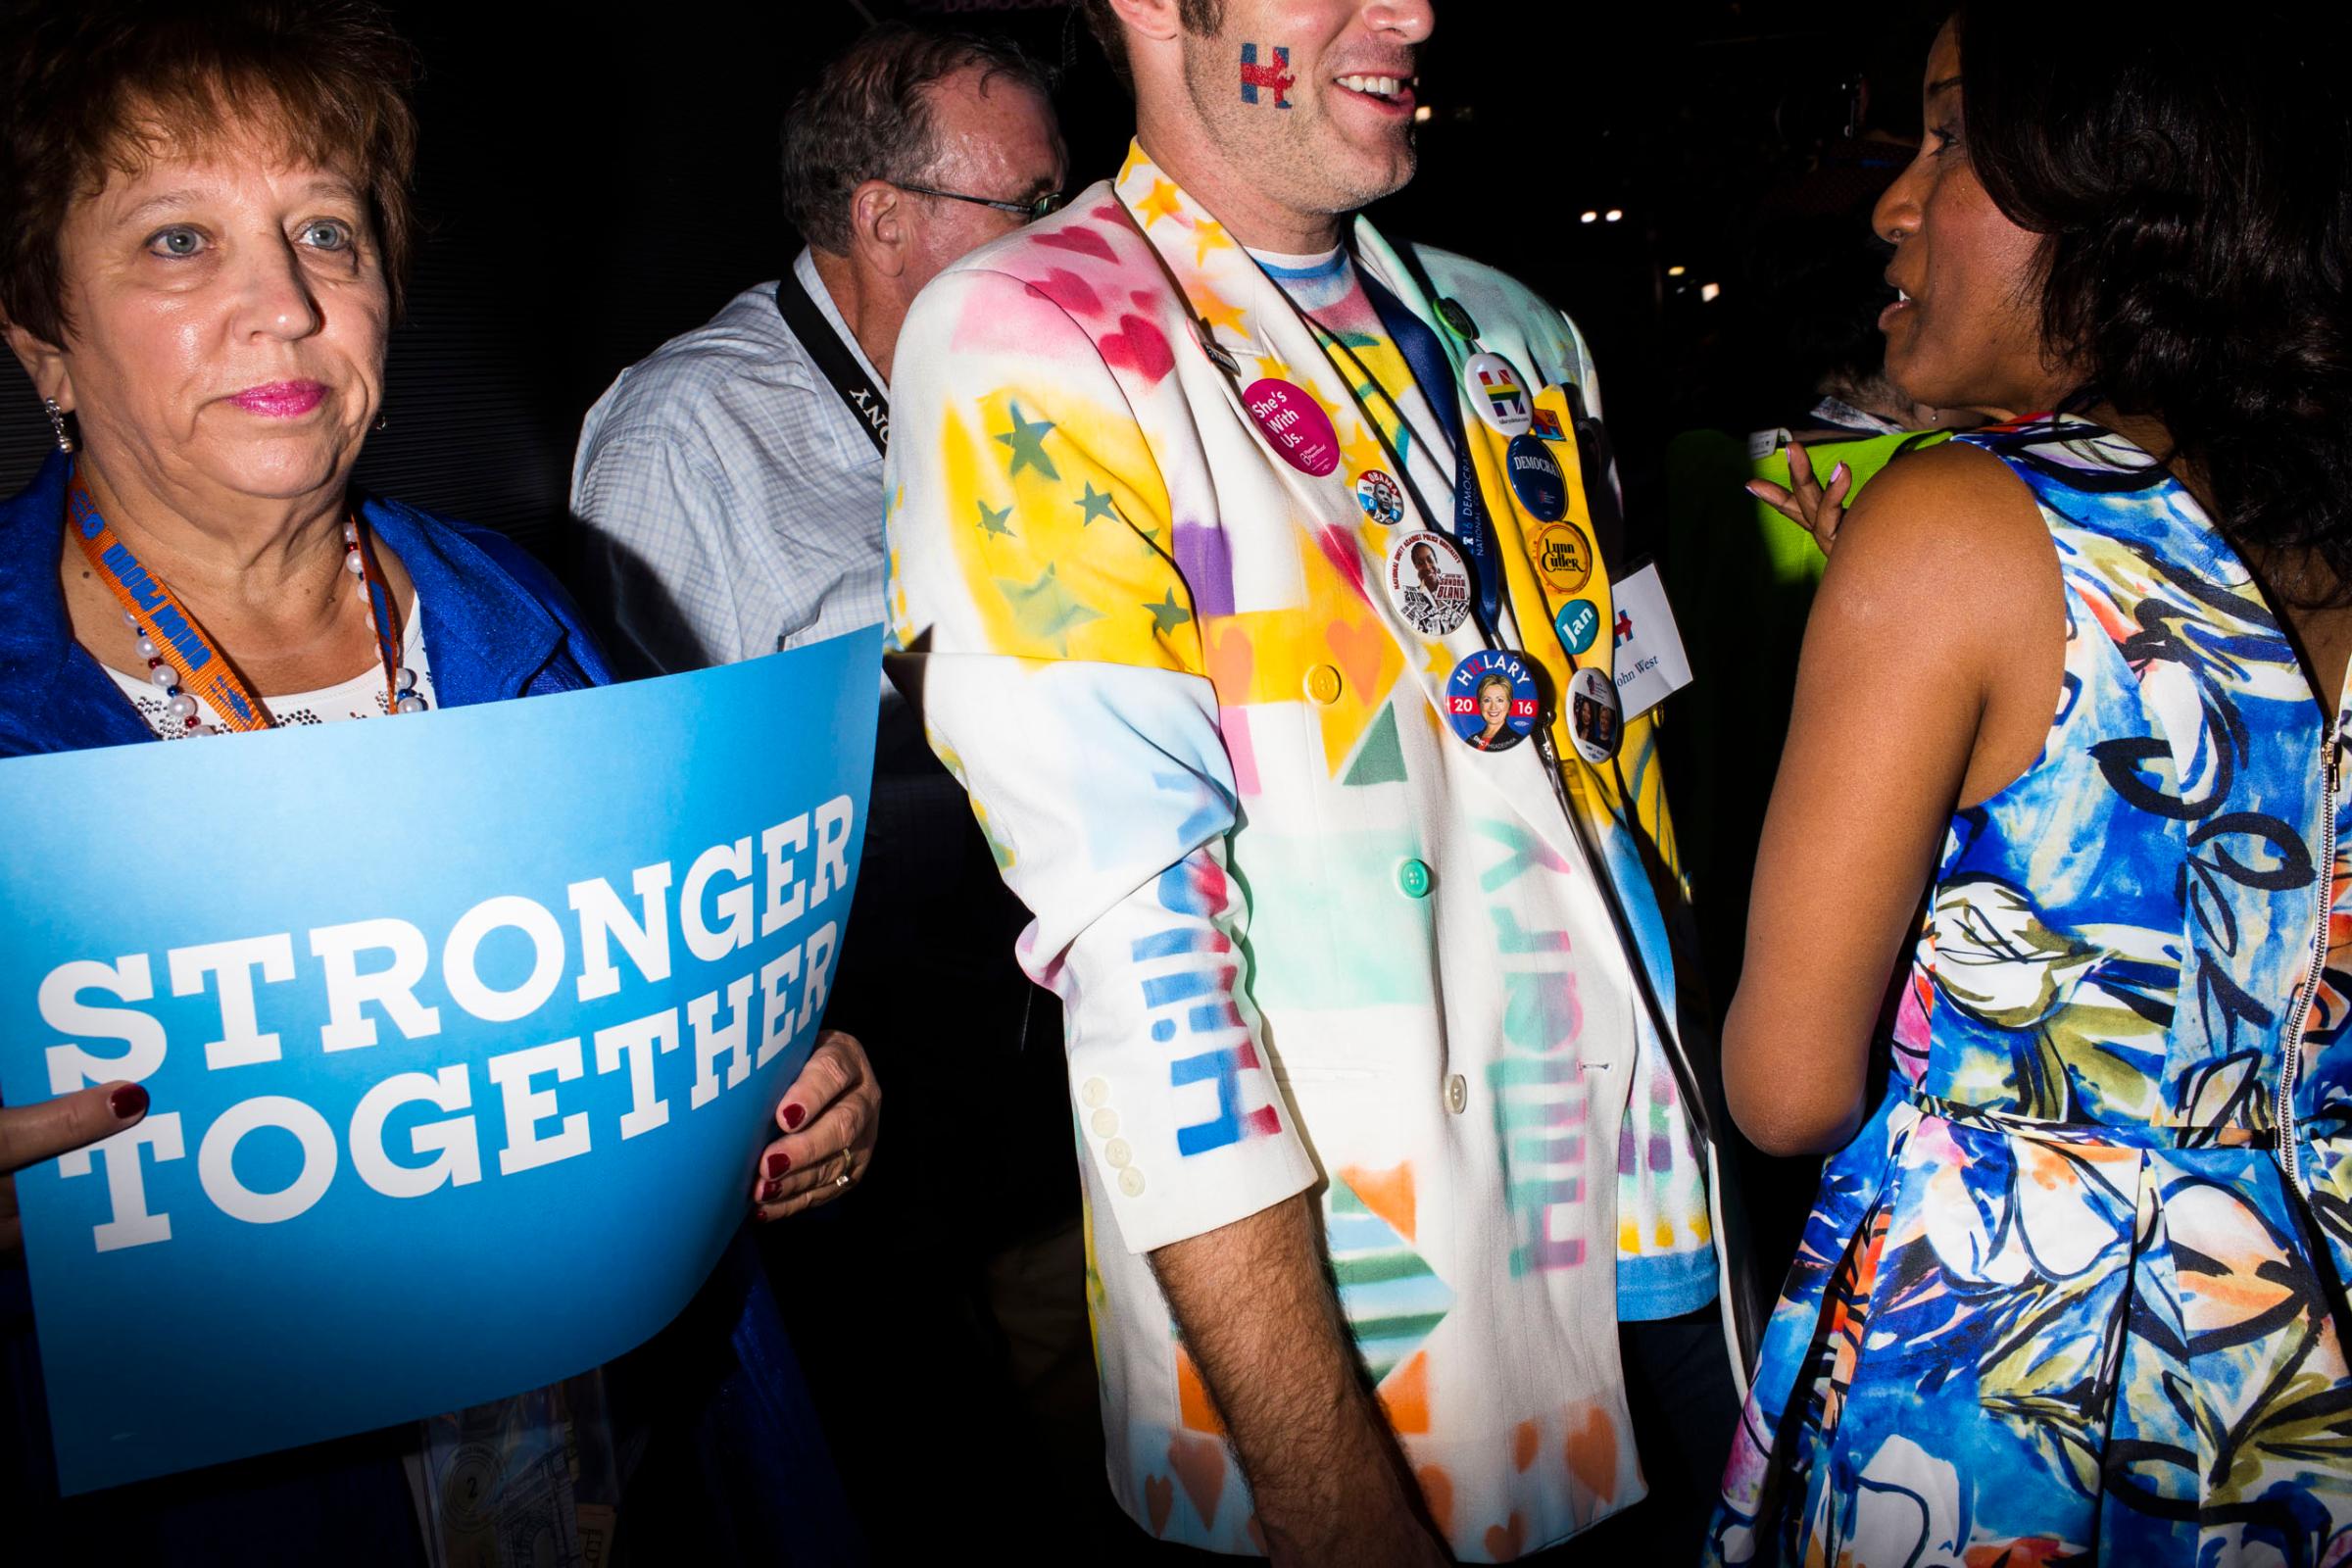 Scenes from the floor at the 2016 Democratic National Convention in Philadelphia on Tuesday, July 26, 2016.